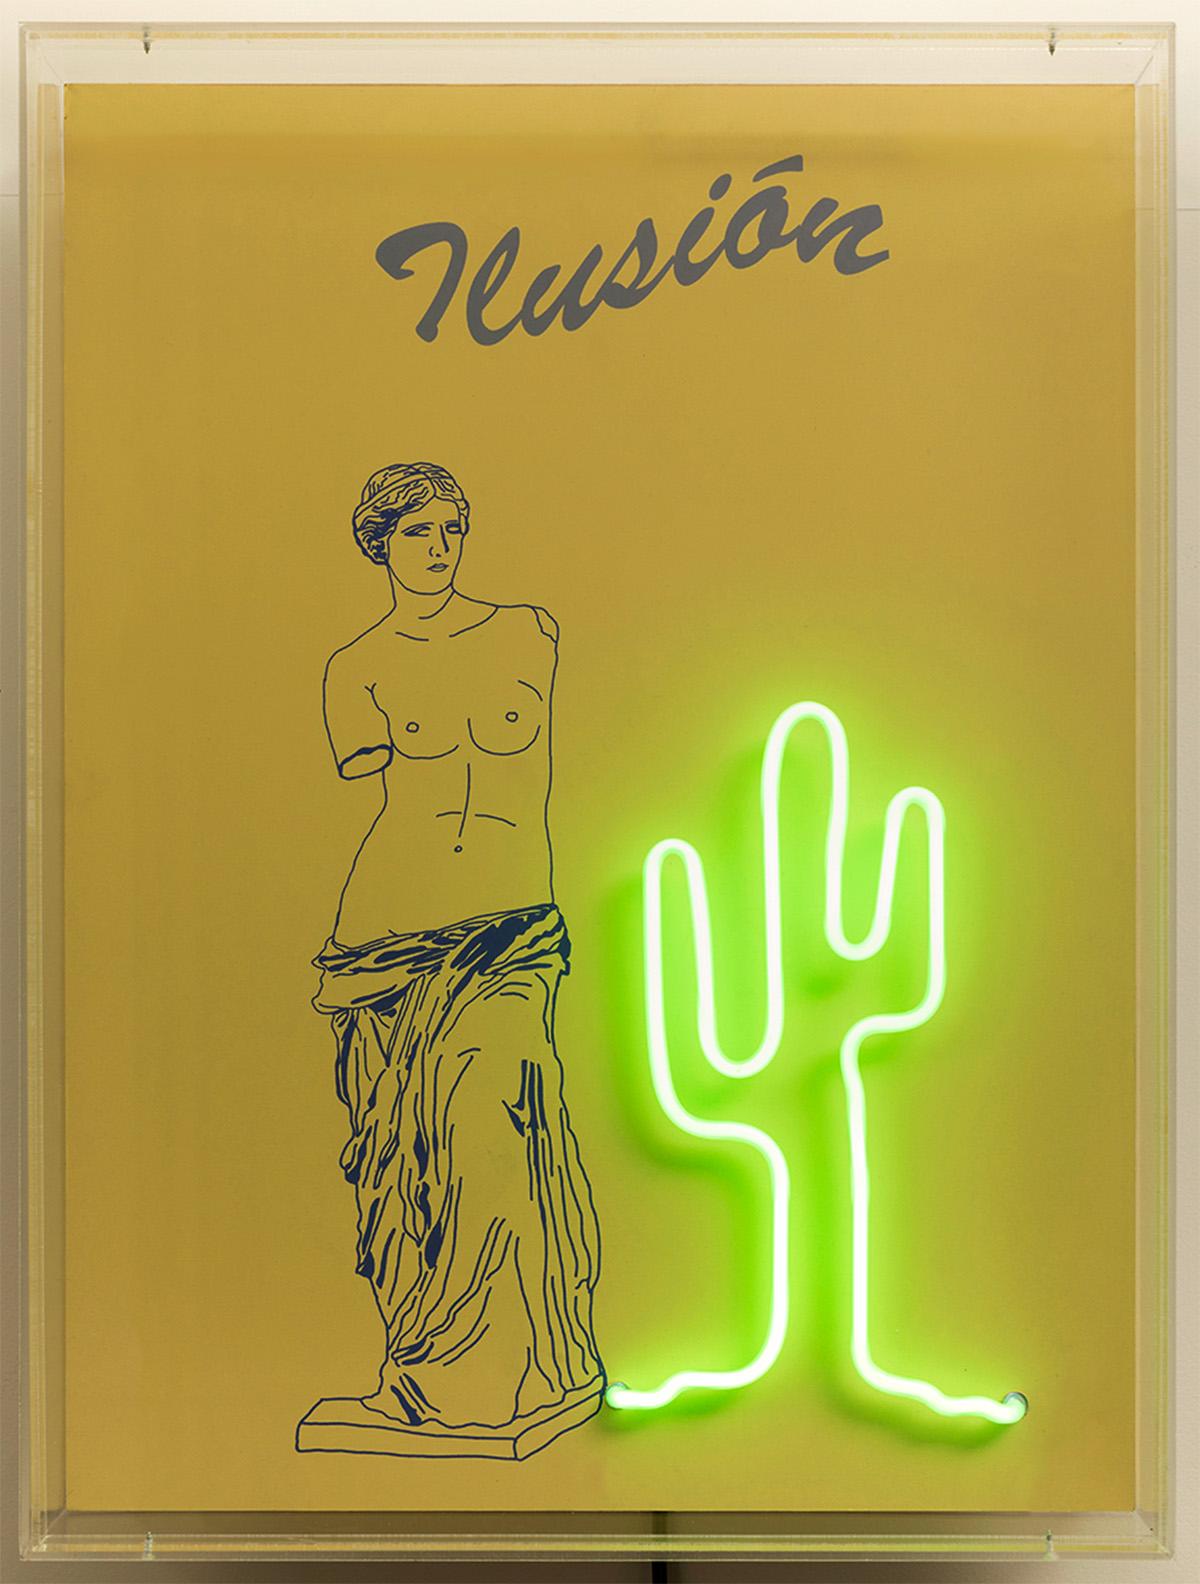 Ilusión, 2019  Paloma Castello 
From the series Neon Classics
Screen printing with neon lights
Dimensions: 24 H in x 18.1 W x 5.9 D in. 
Edition 1/10

In her work She likes to bring life to objects or icons from the past, intervening in them a bit,